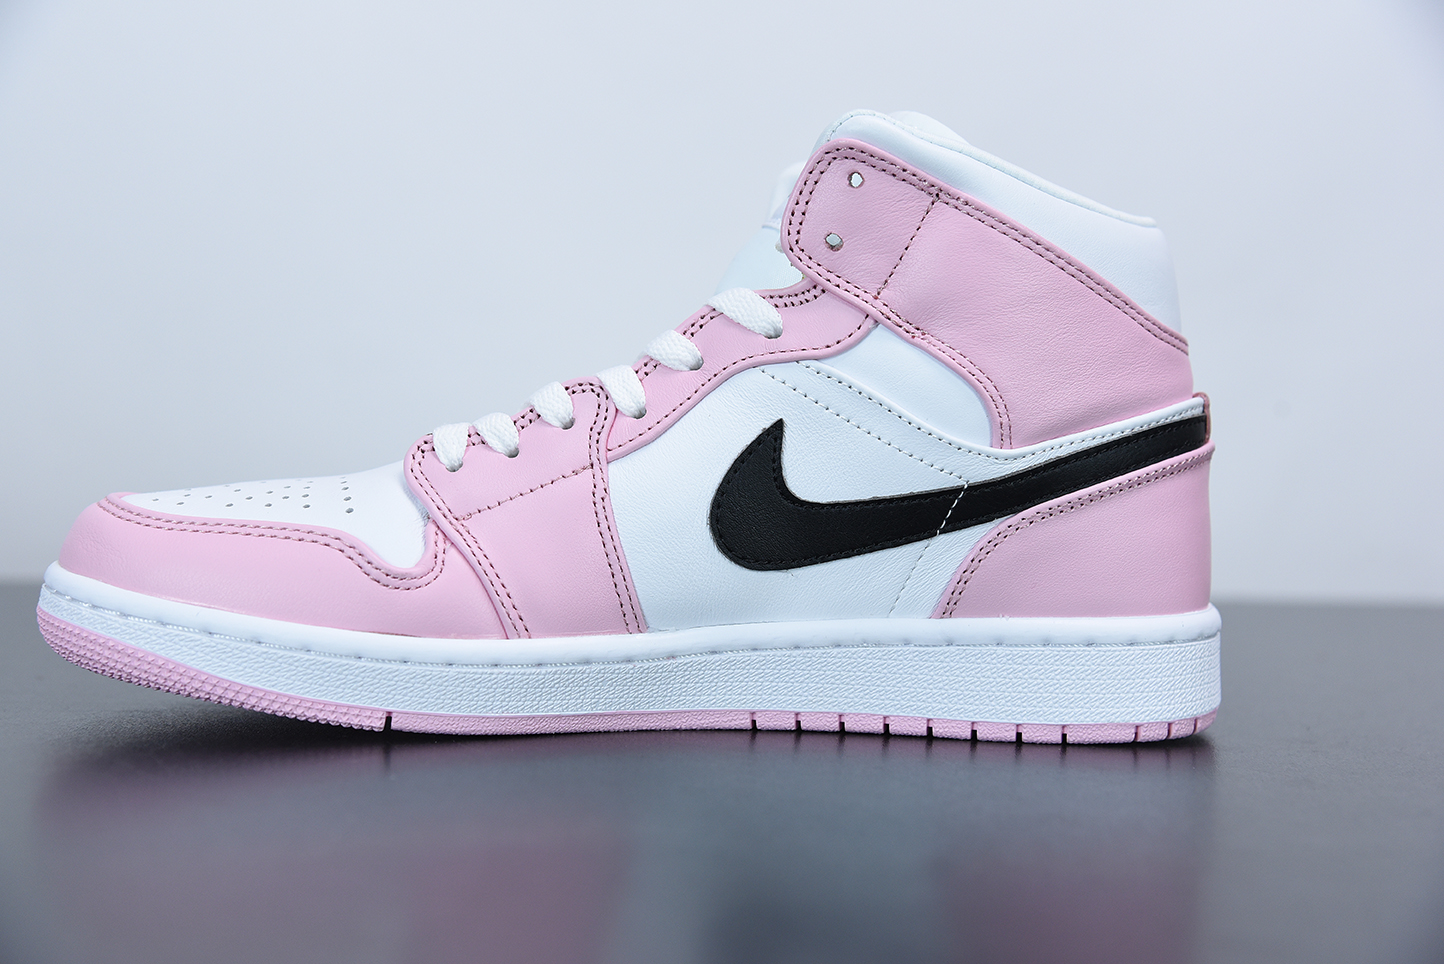 Air Jordan 1 Mid White Pink Black For Sale – The Sole Line